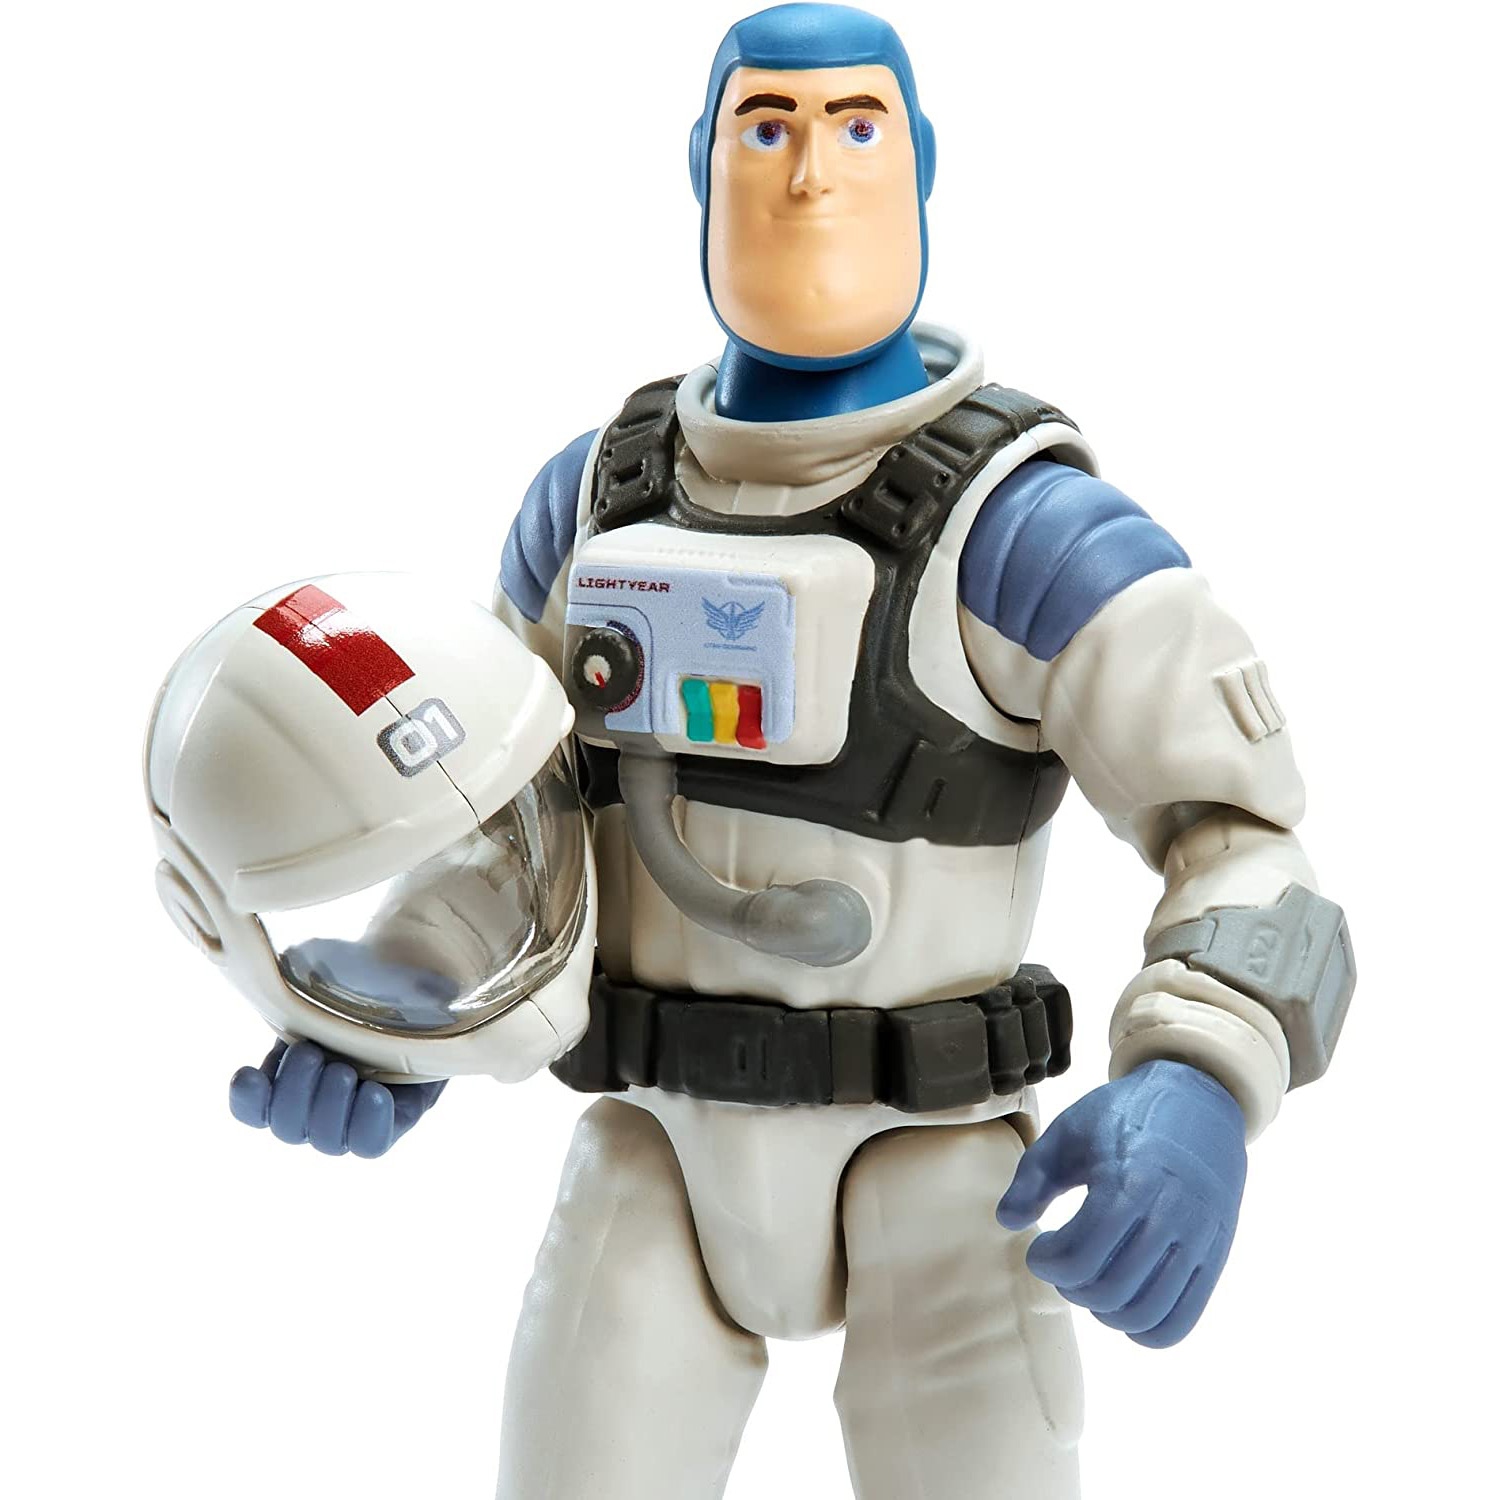 Disney Pixar Lightyear XL01 Buzz Lightyear 5 Inch Action Figure With 12 Posable Joints